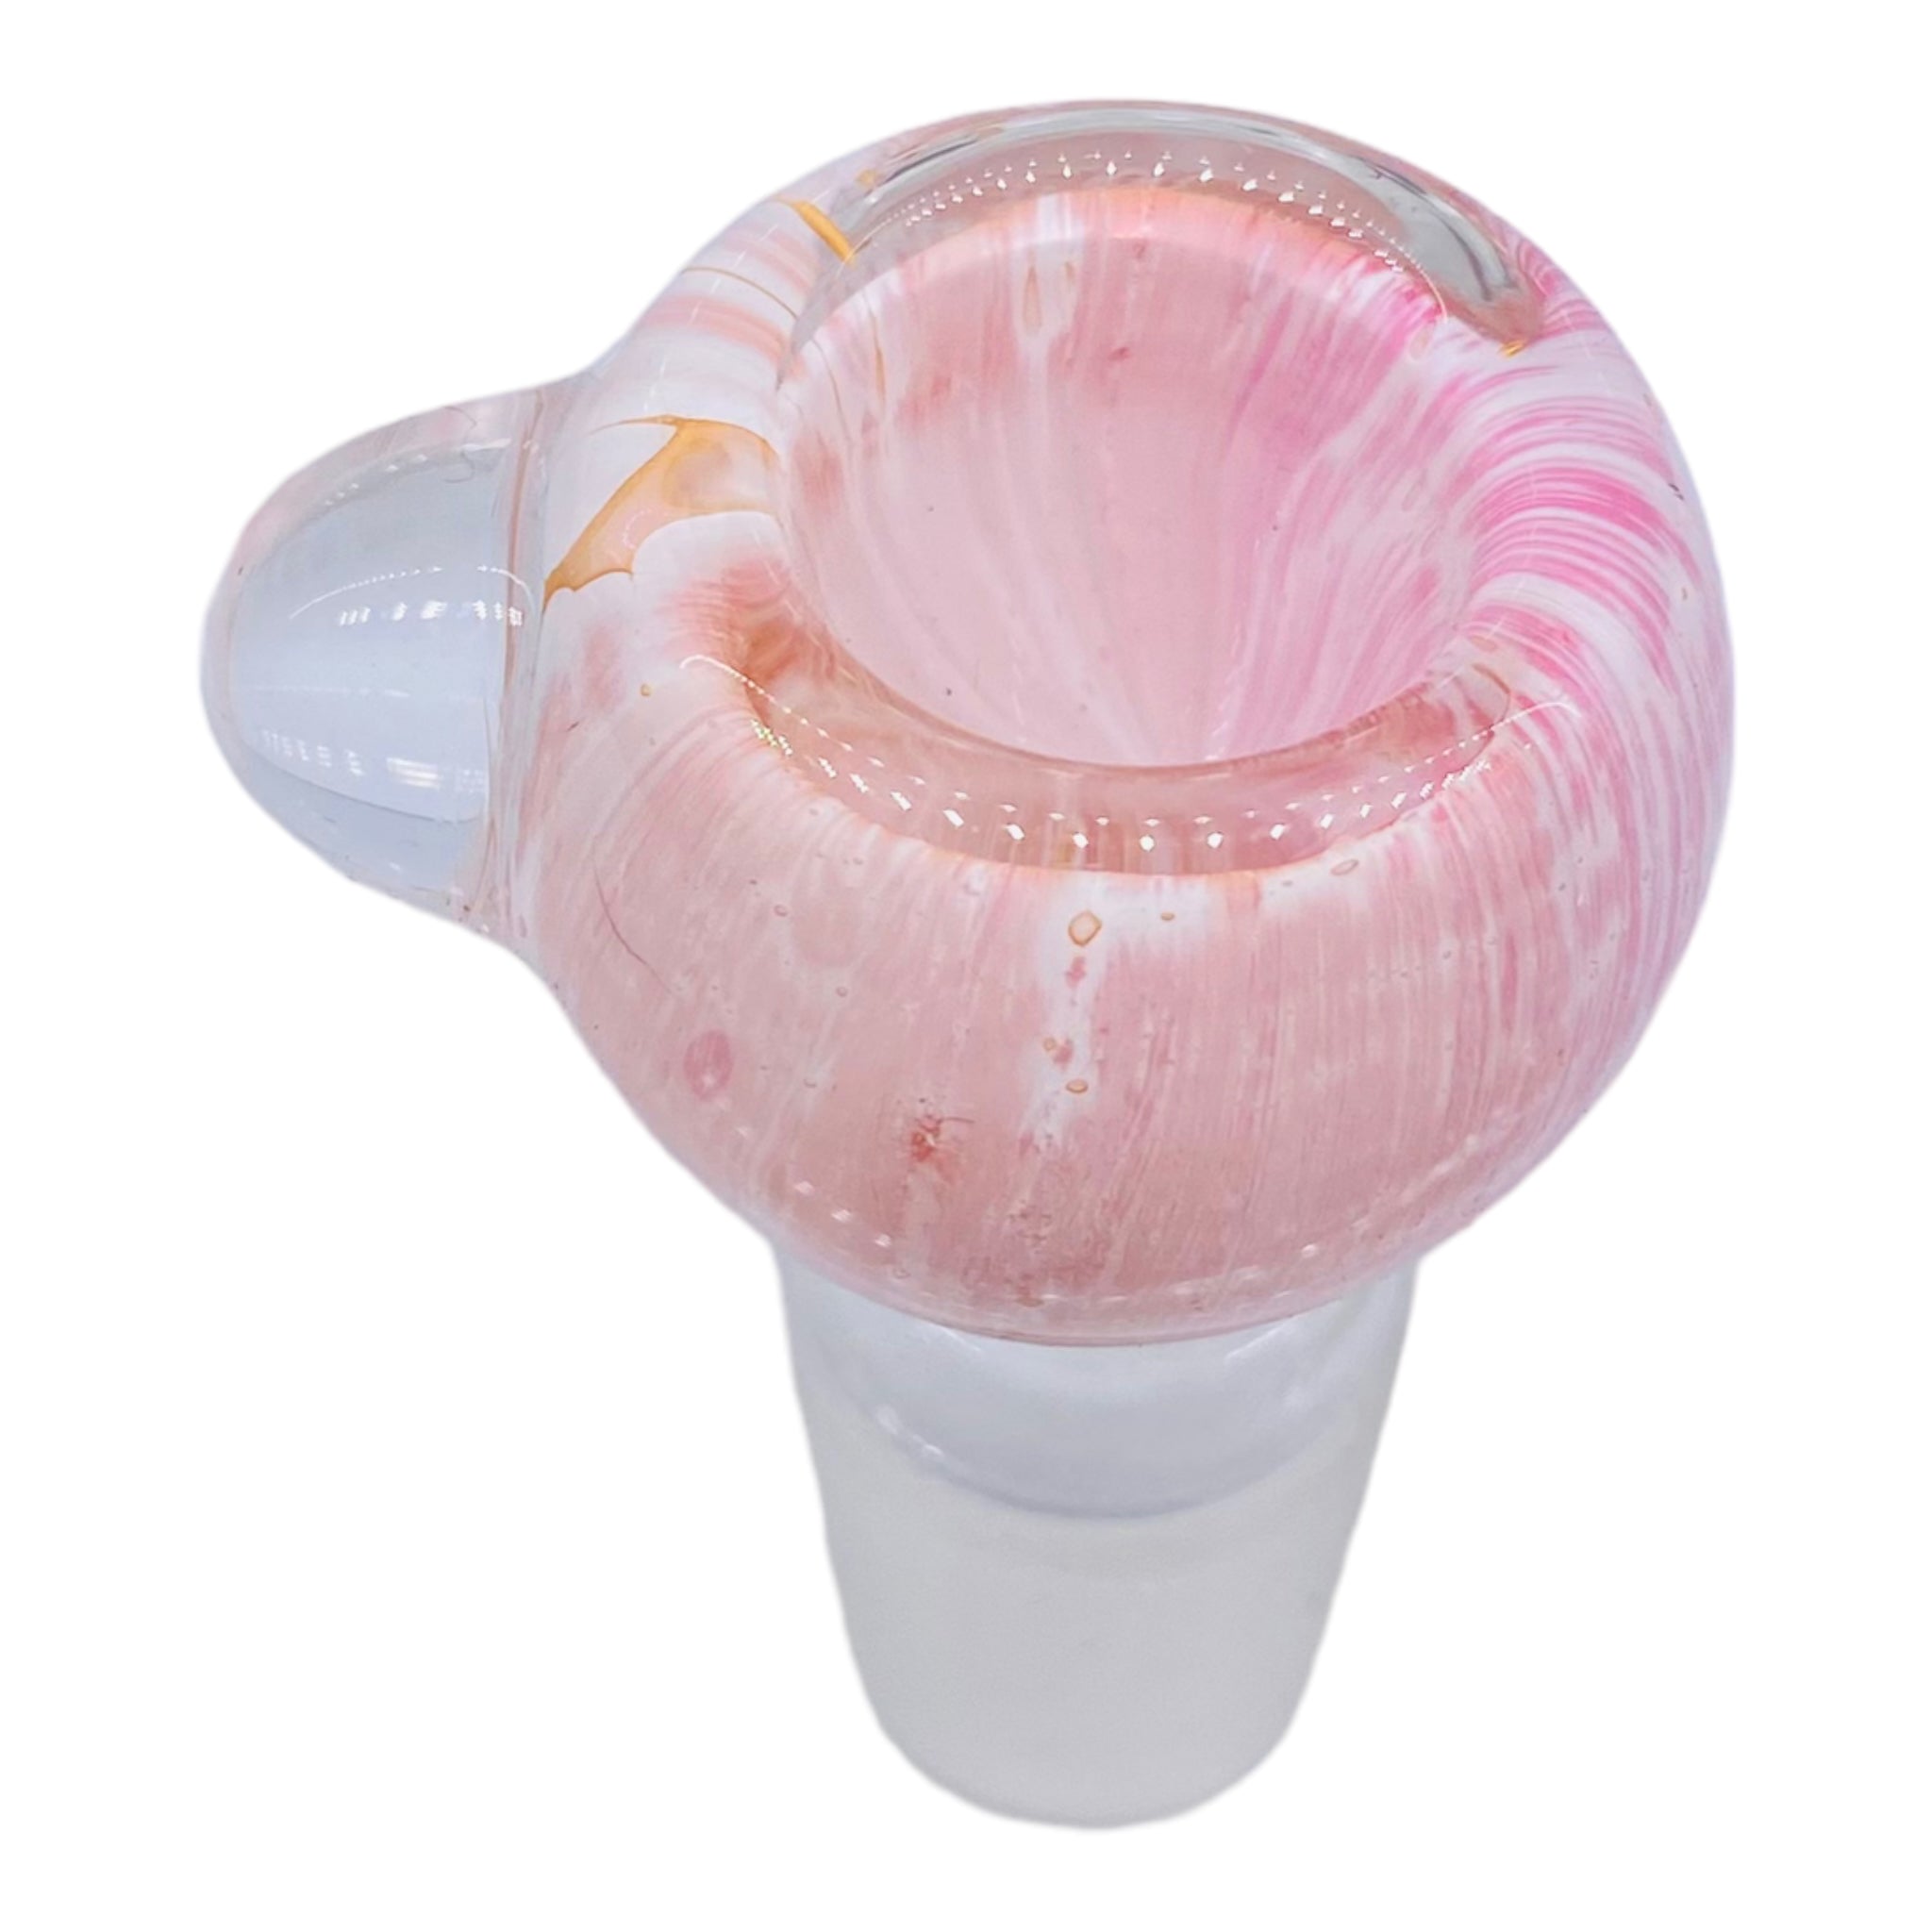 18mm Flower Bowl - Pink And White Basic Bubble Bong Bowl Piece